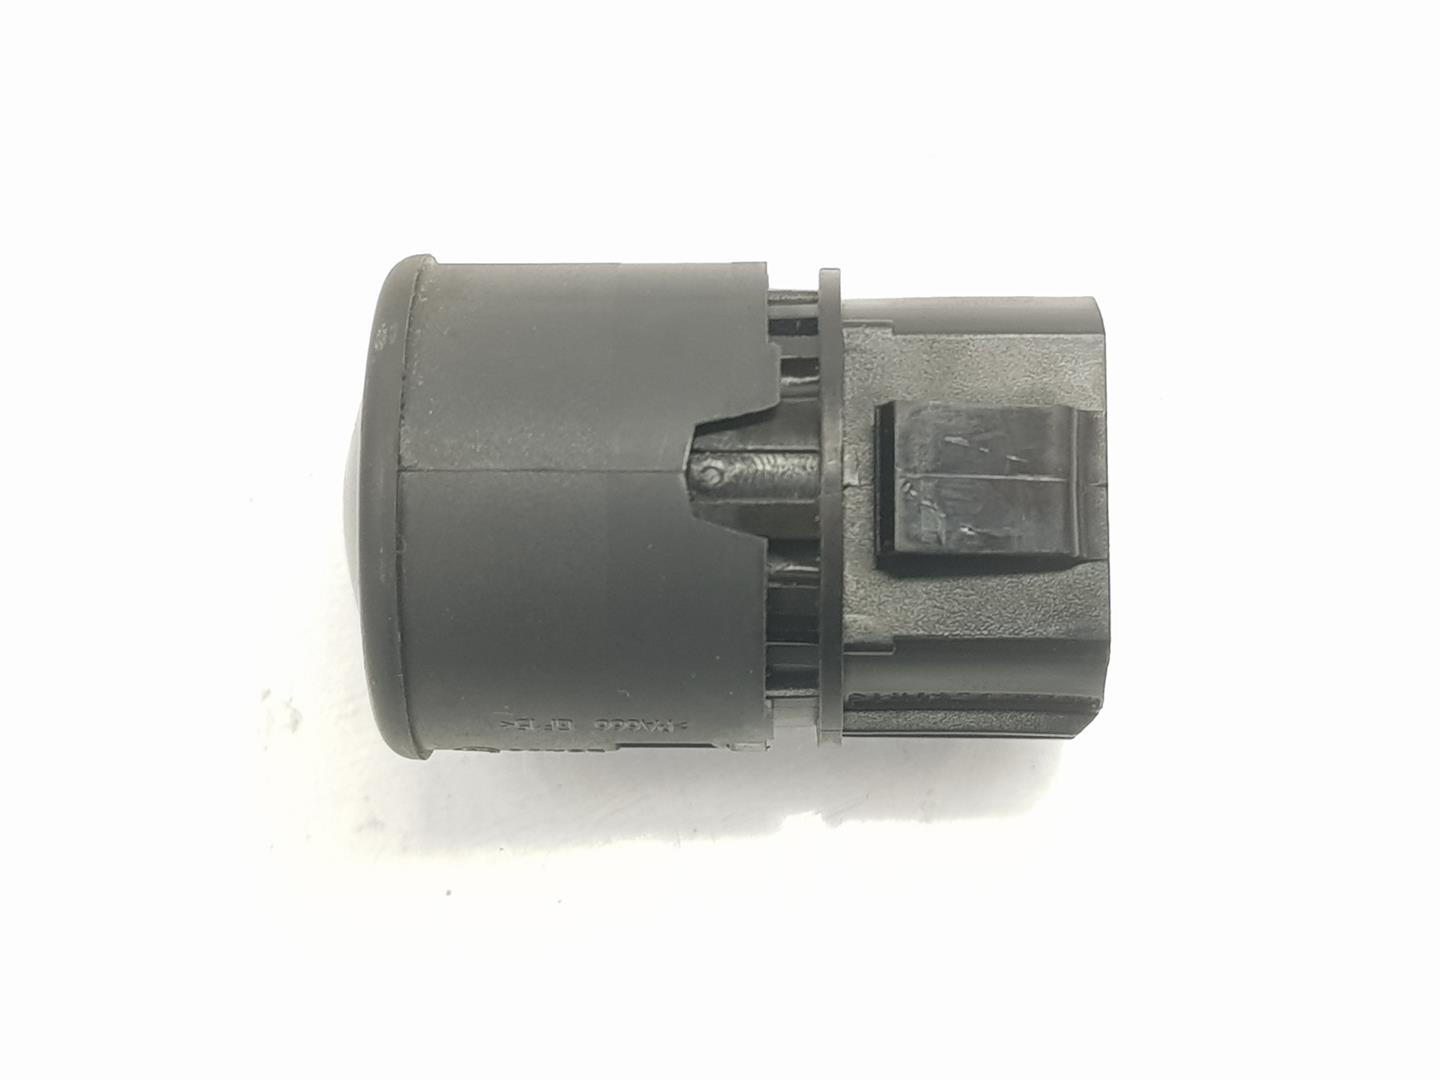 RENAULT Scenic 3 generation (2009-2015) Ignition Button 251506978R, 251506978R 21421478